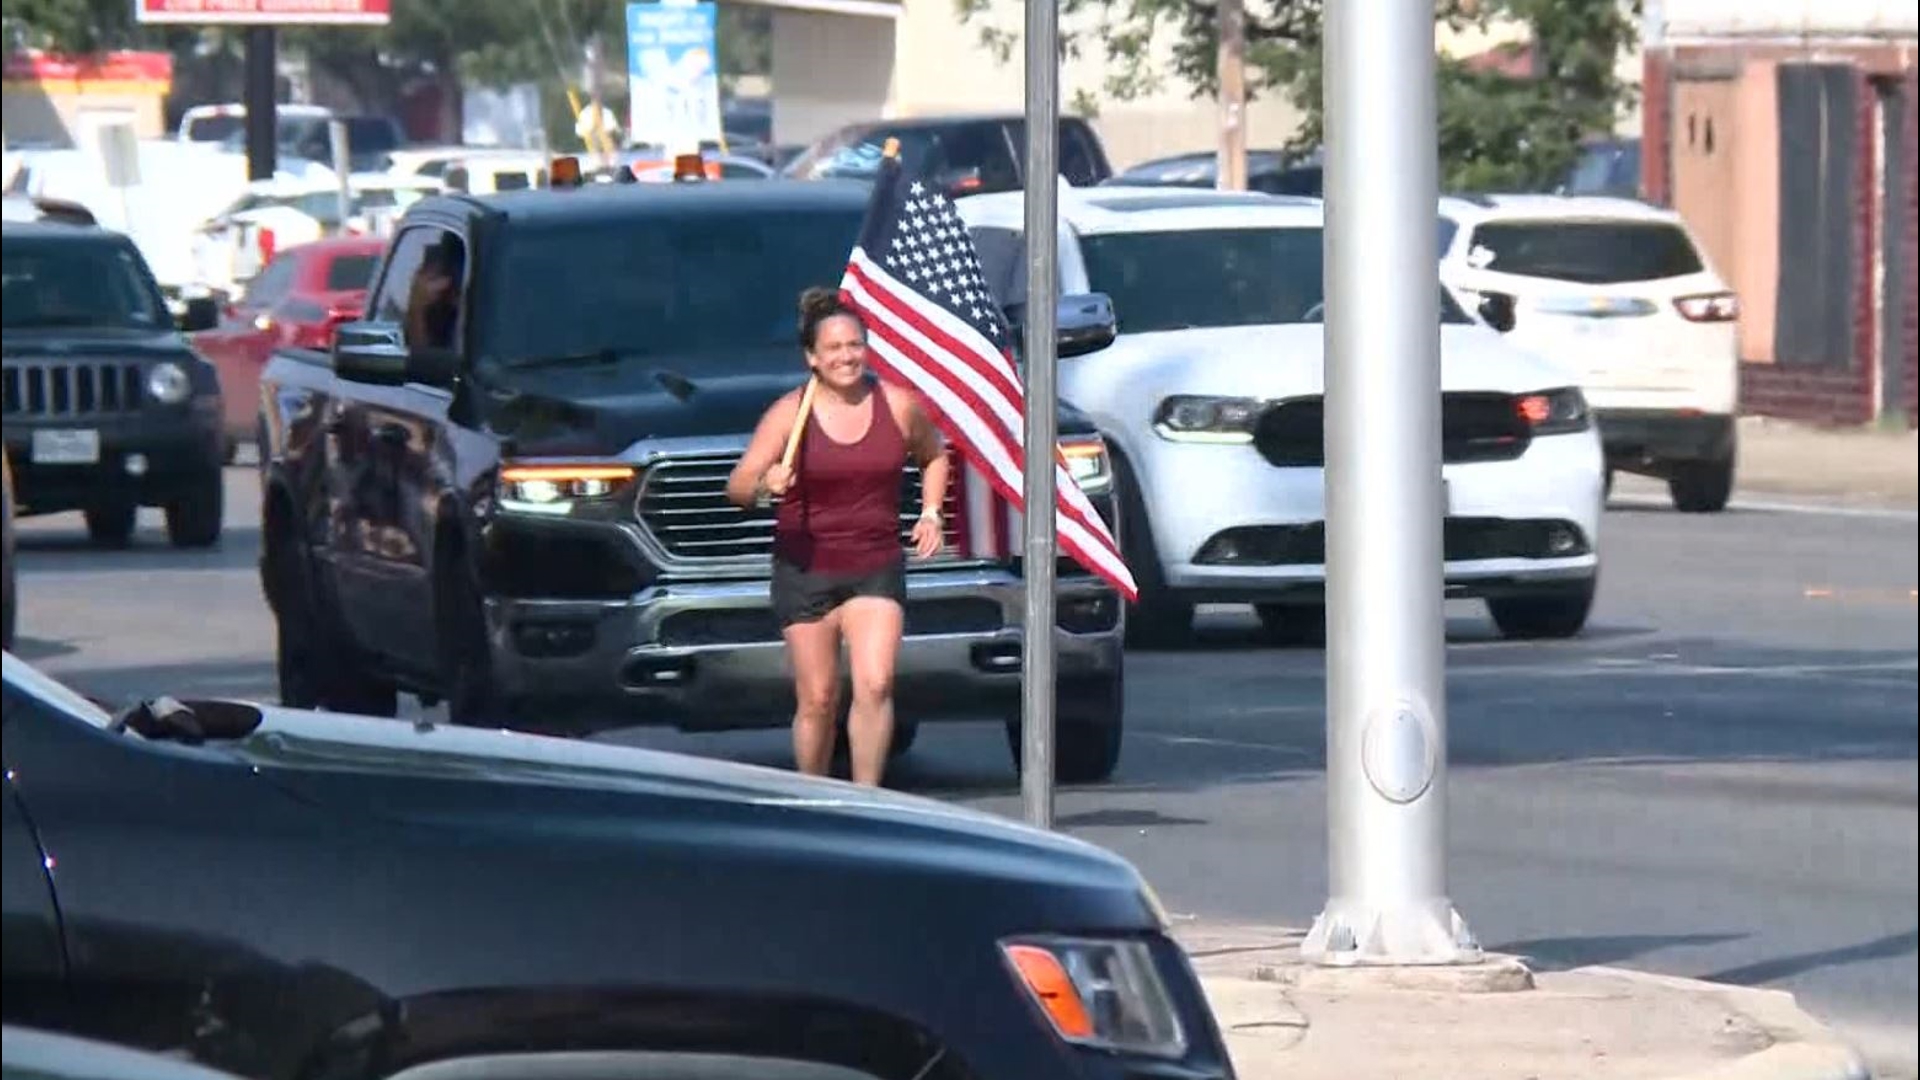 Paloma Gonzalez set out from San Antonio on Thursday evening. Nearly 24 hours later, she reached Uvalde Town Square.